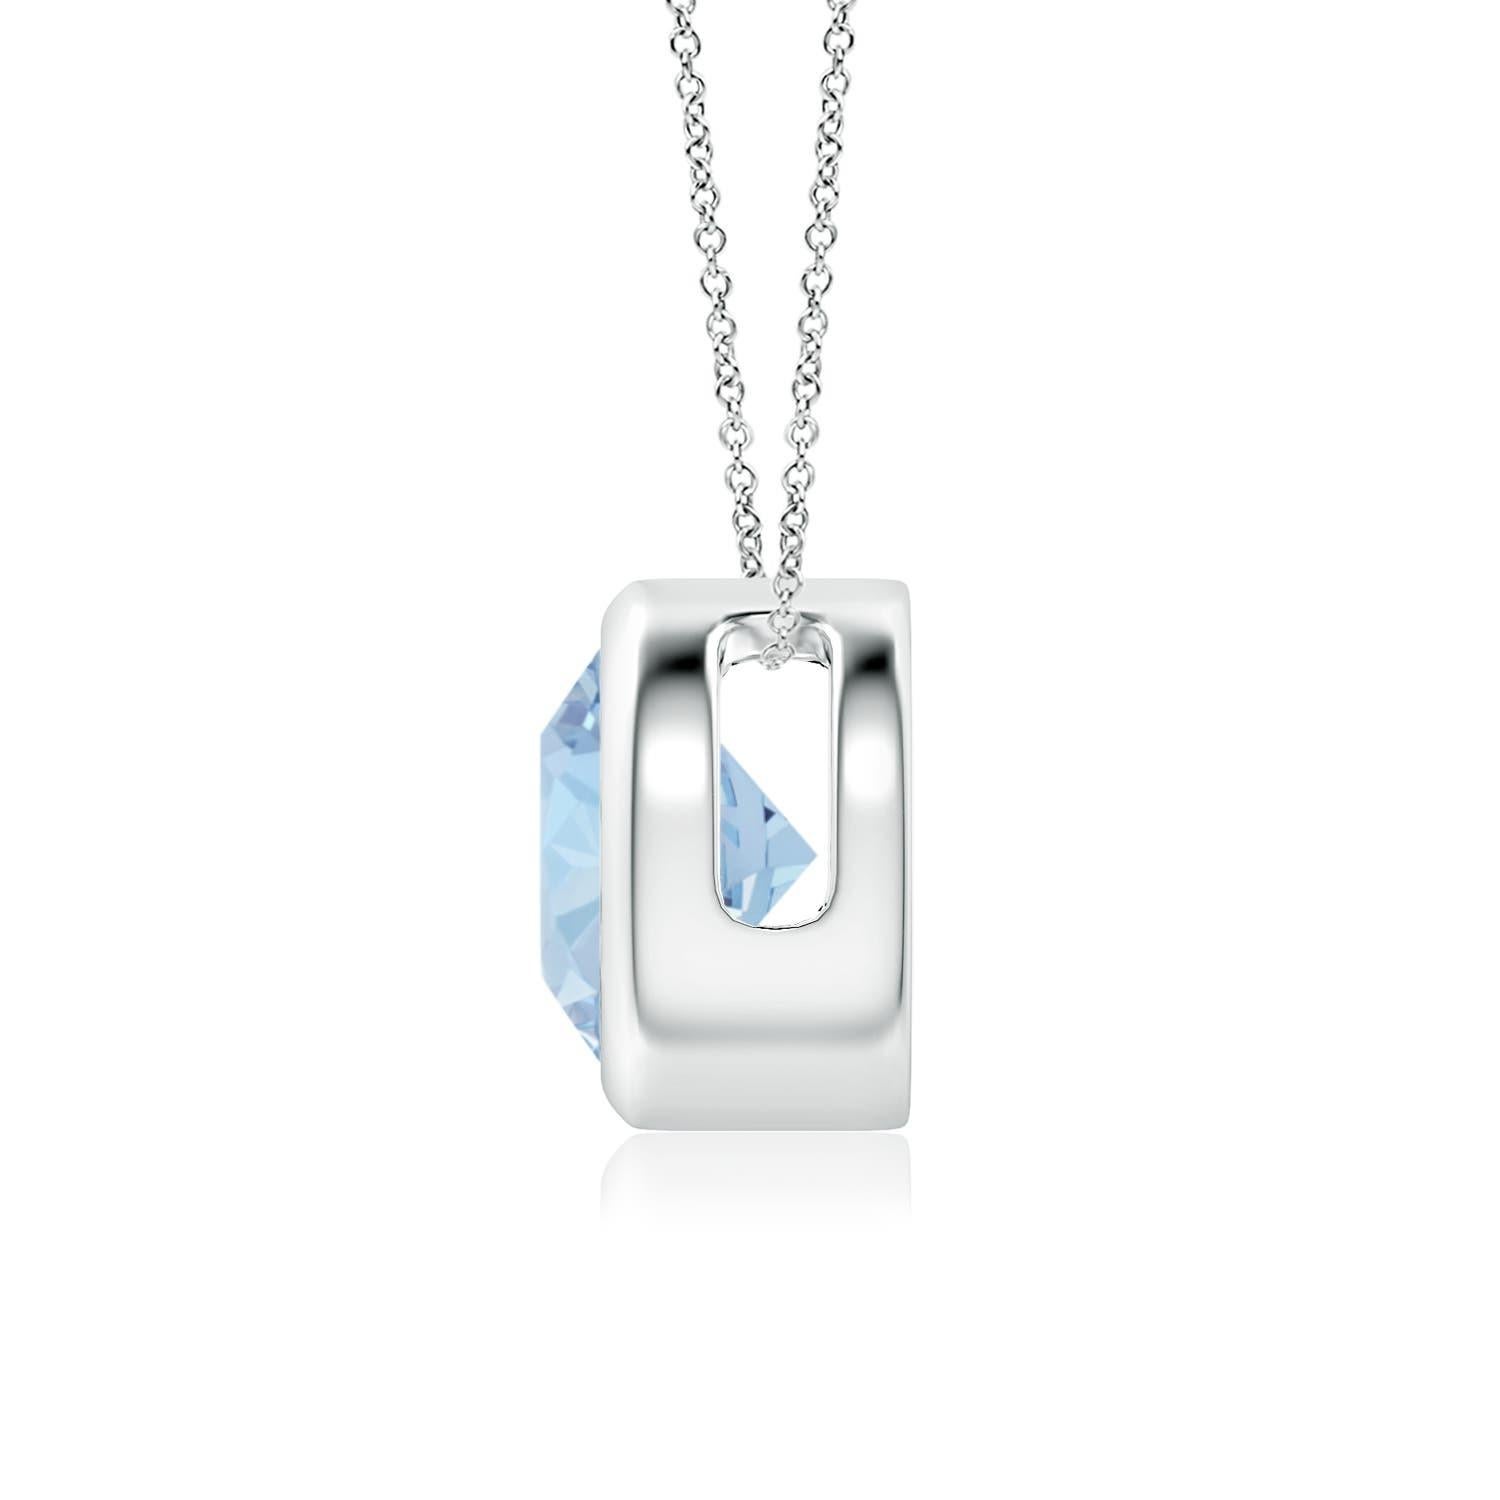 This classic solitaire aquamarine pendant's beautiful design makes the center stone appear like it's floating on the chain. The radiant sea blue aquamarine is secured in a bezel setting. Crafted in platinum, this round aquamarine pendant is simple